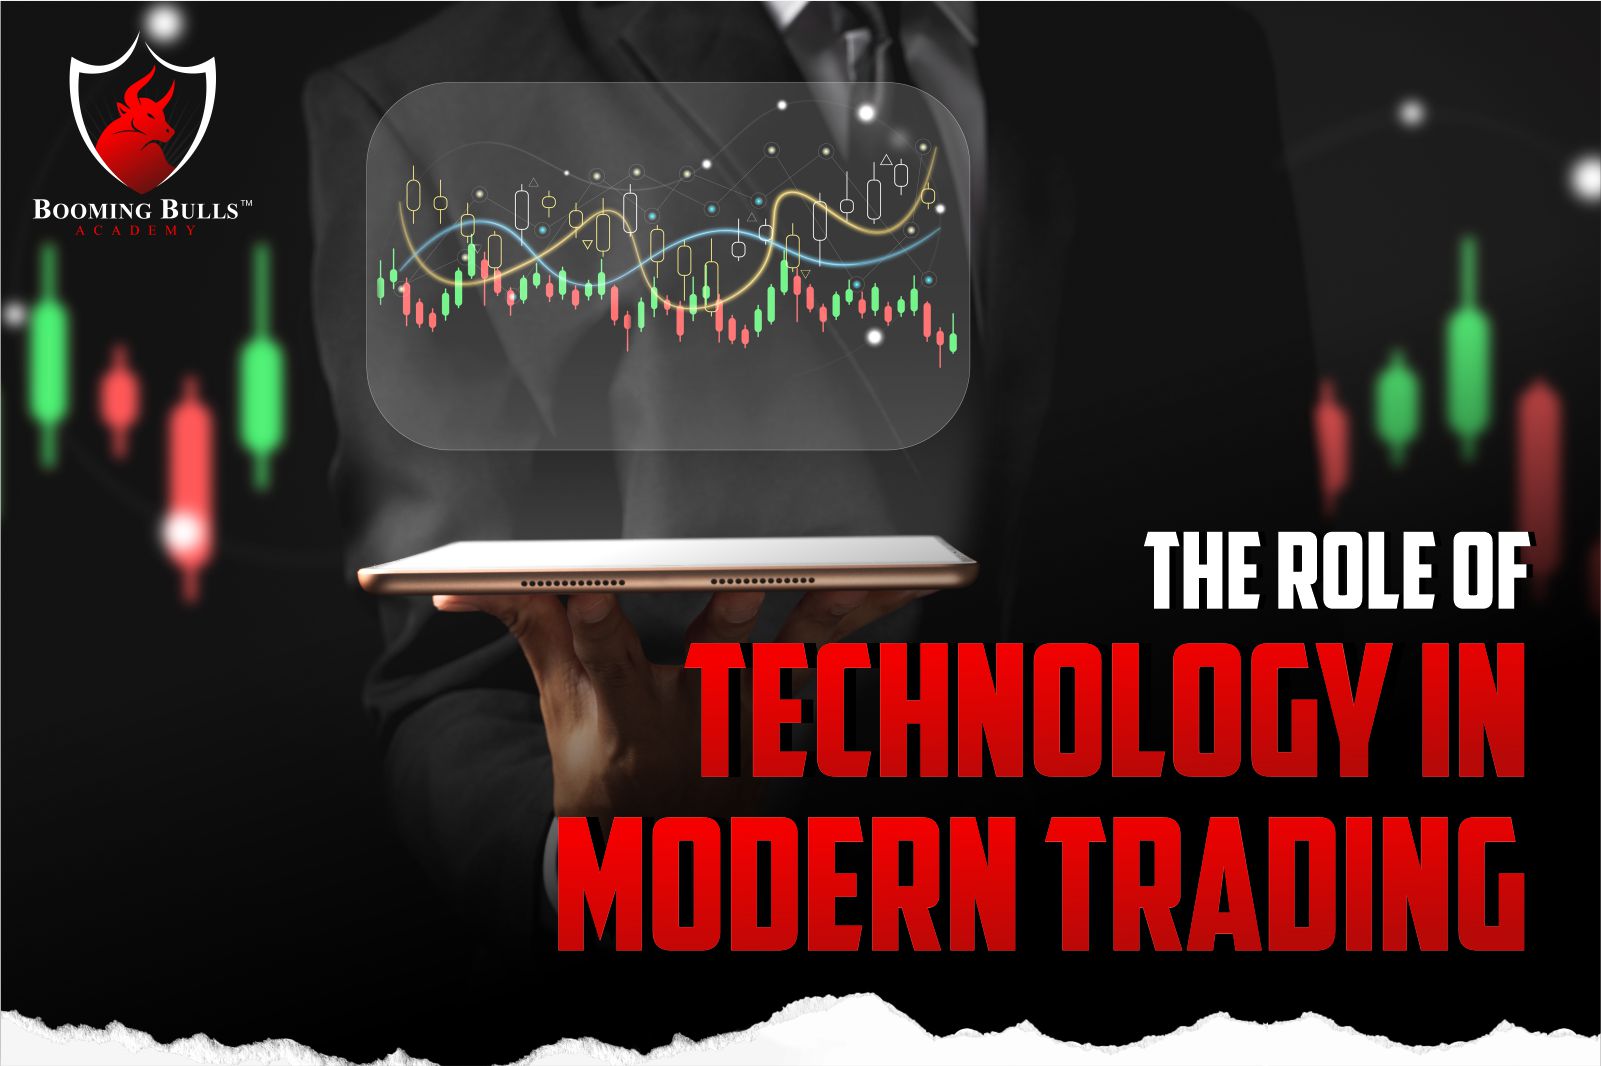 The Role of Technology in Modern Trading